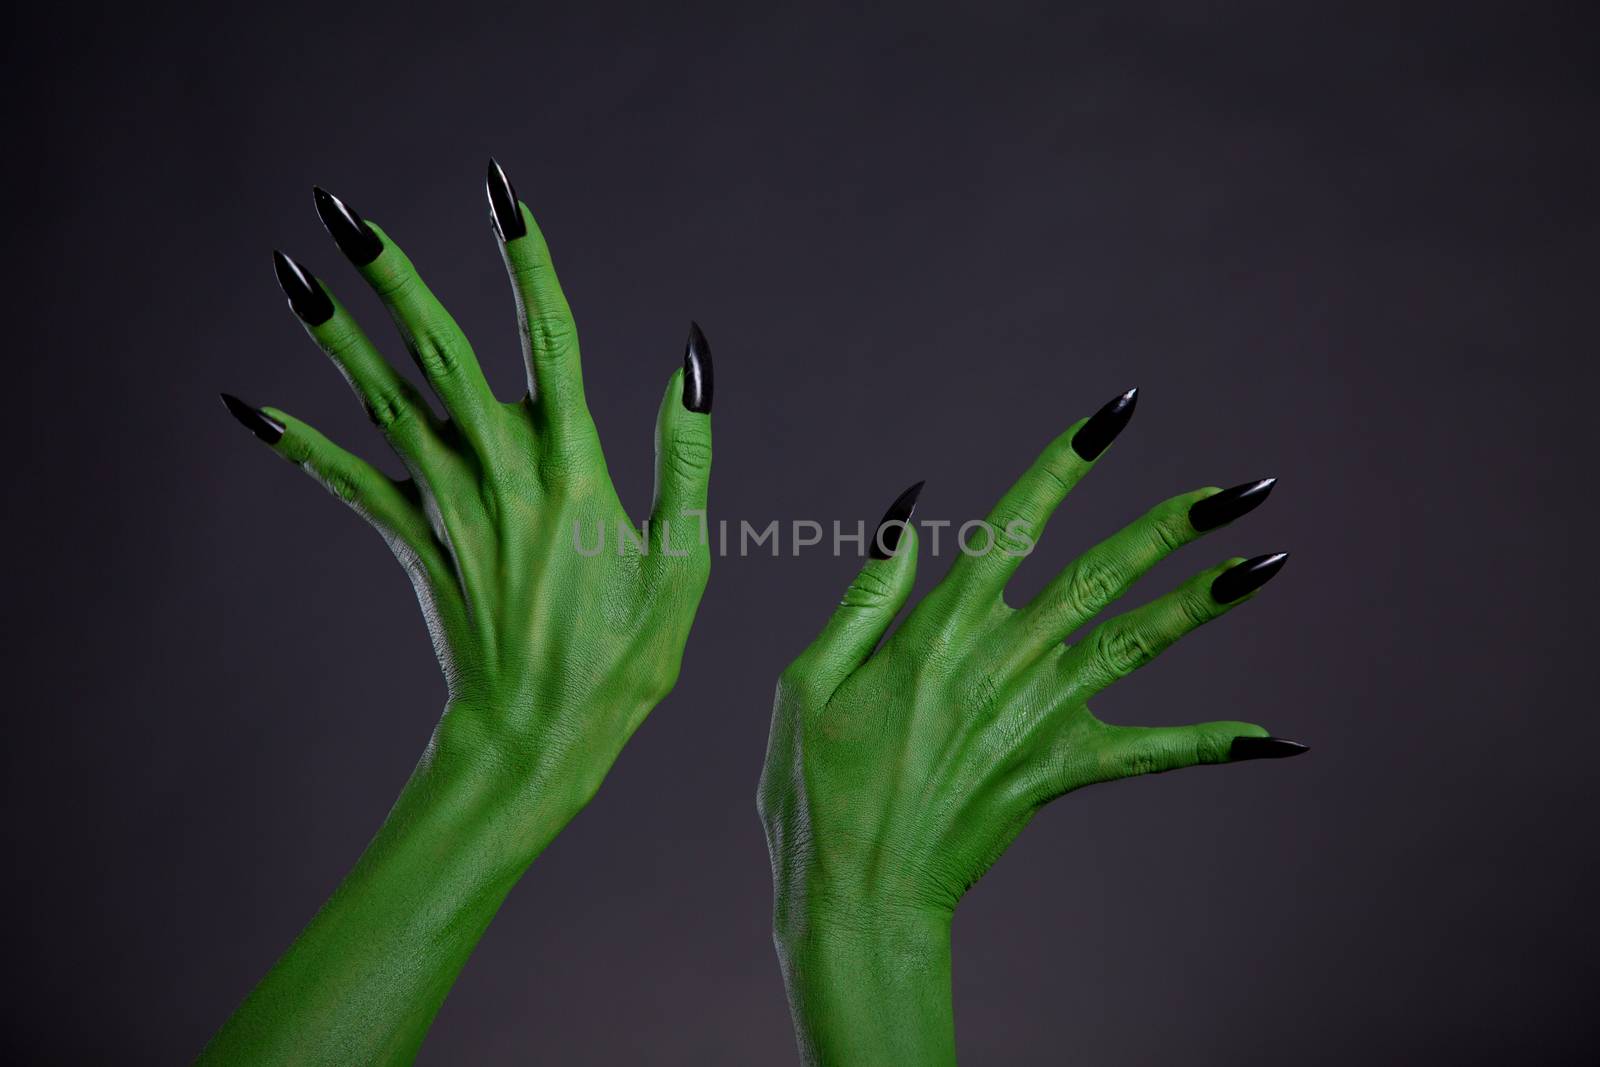 Green monster hands with black nails, Halloween theme, studio shot on black background 